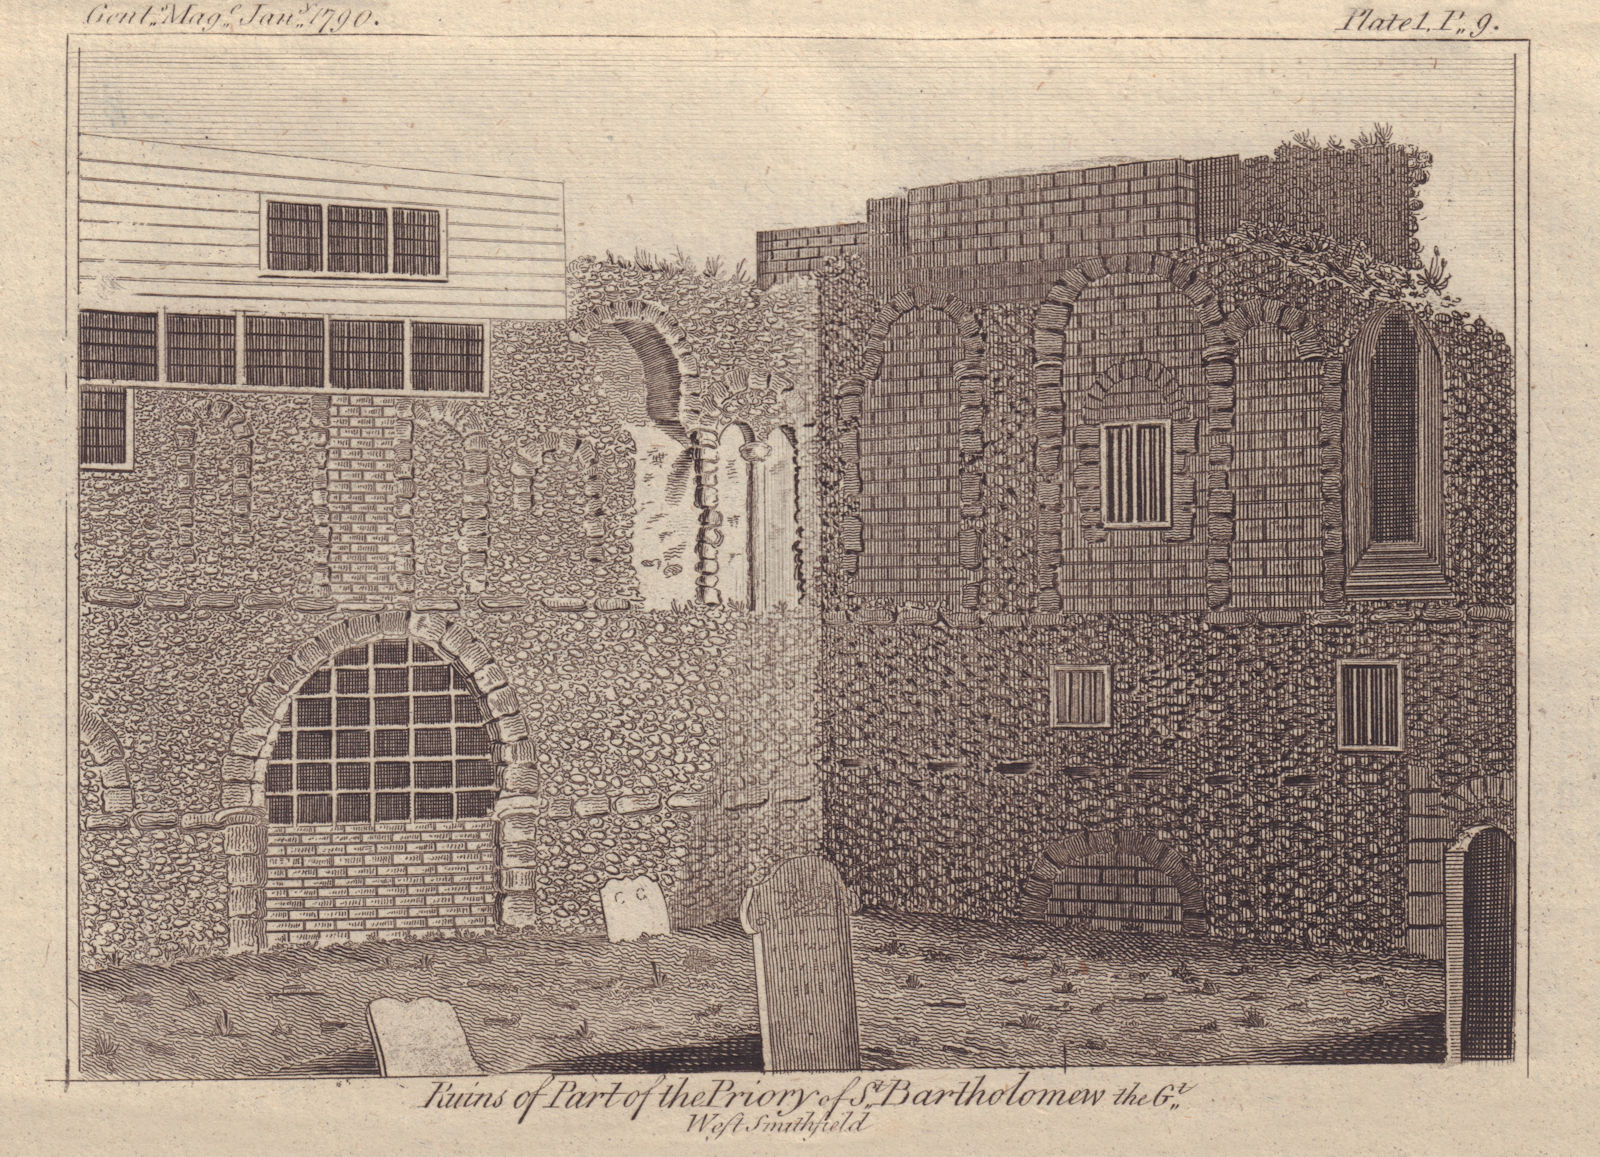 Ruins of the Priory of St. Bartholomew the Great, Smithfield, London 1790